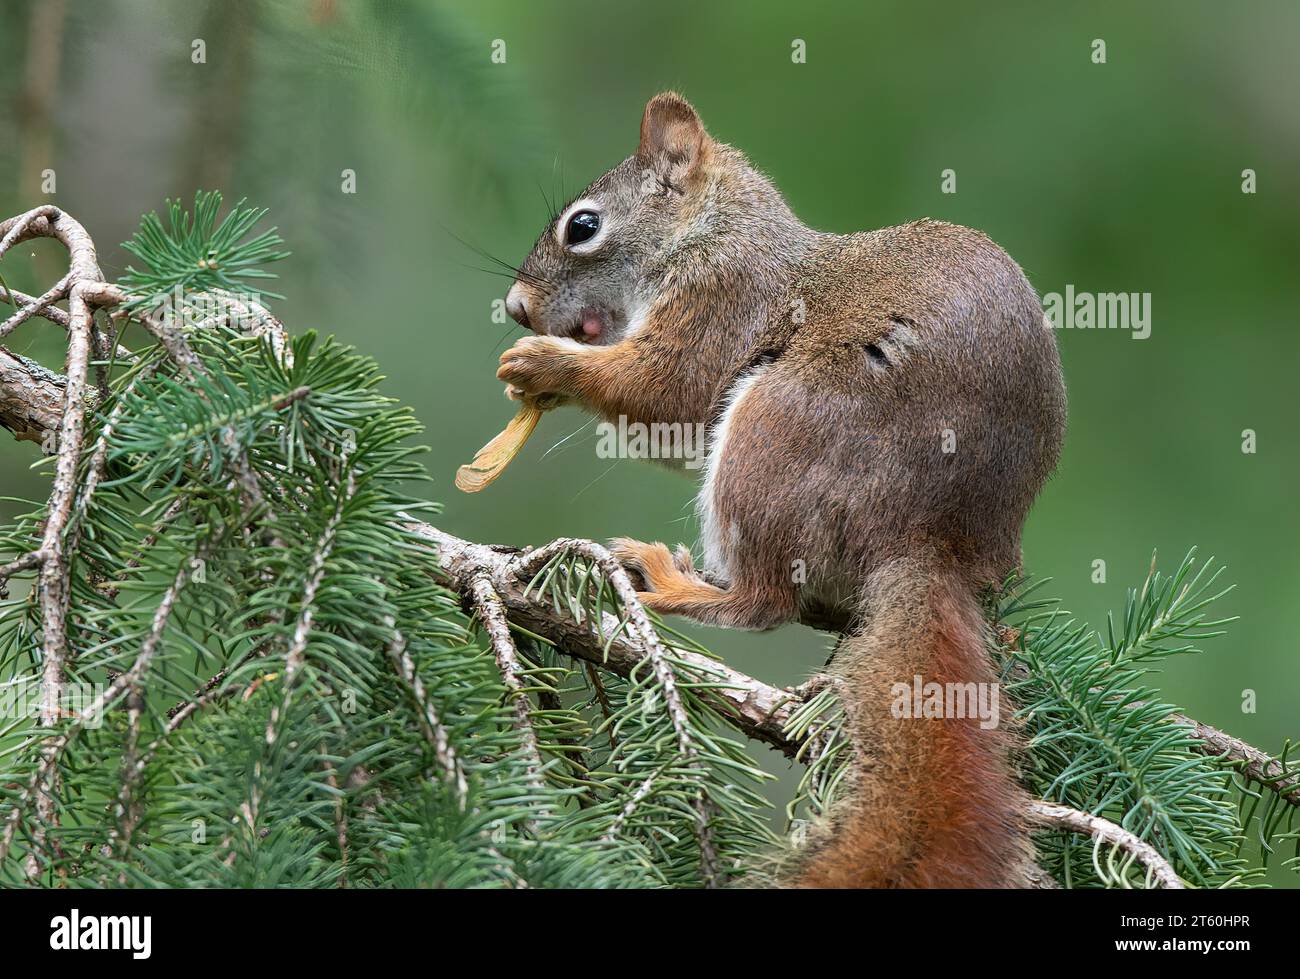 Cute Red Squirrel (Sciurus vulgaris) sitting in a White Spruce (Picea glauca) boughs eating a Maple seed in the Chippewa National Forest, Minnesota Stock Photo